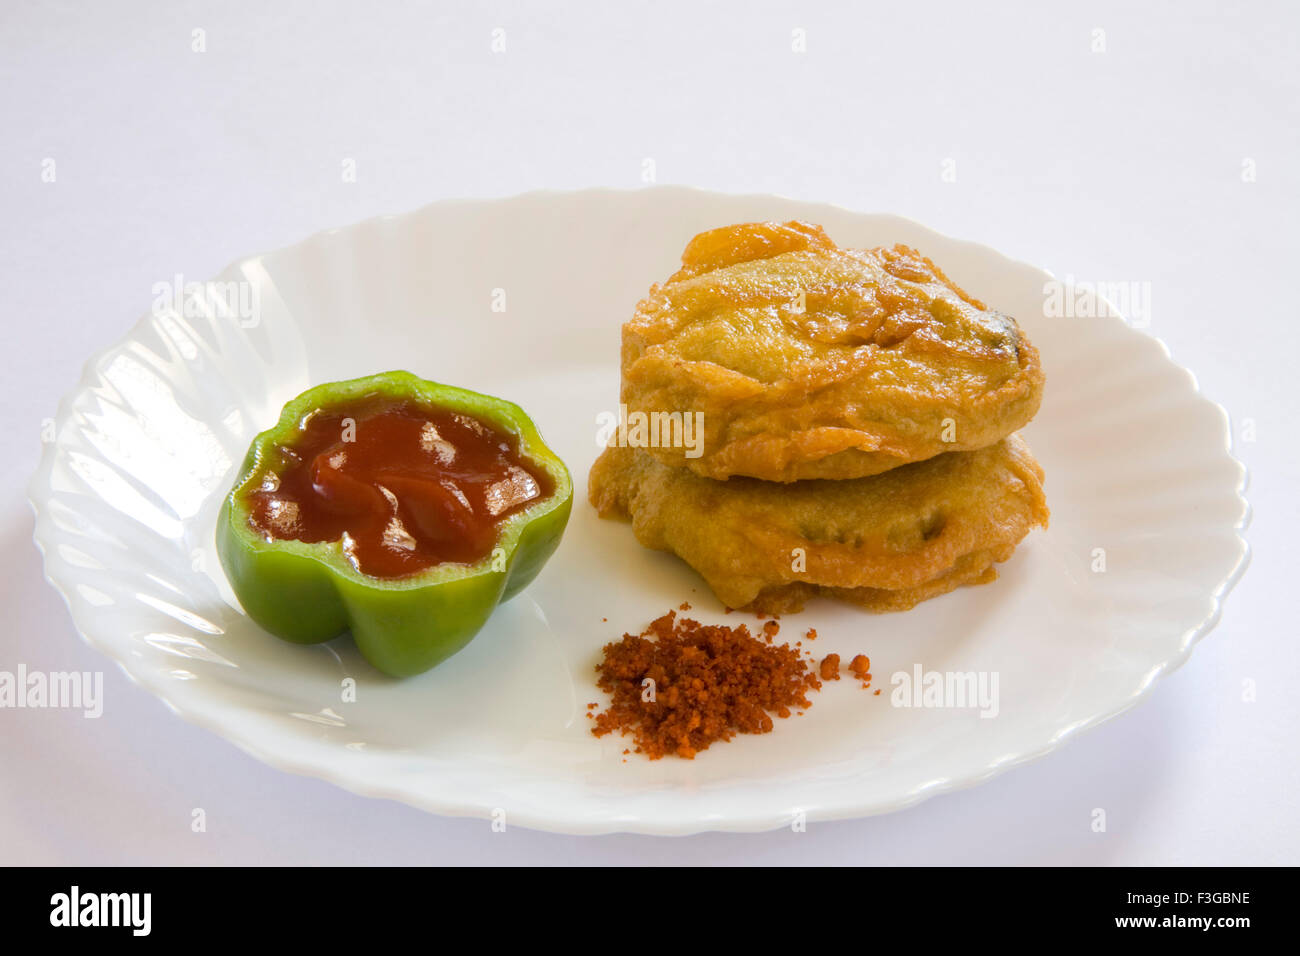 Indian fast food fried batata or potatoes vada with chopped green chilli served chutneys tomato ketchup served plate Stock Photo